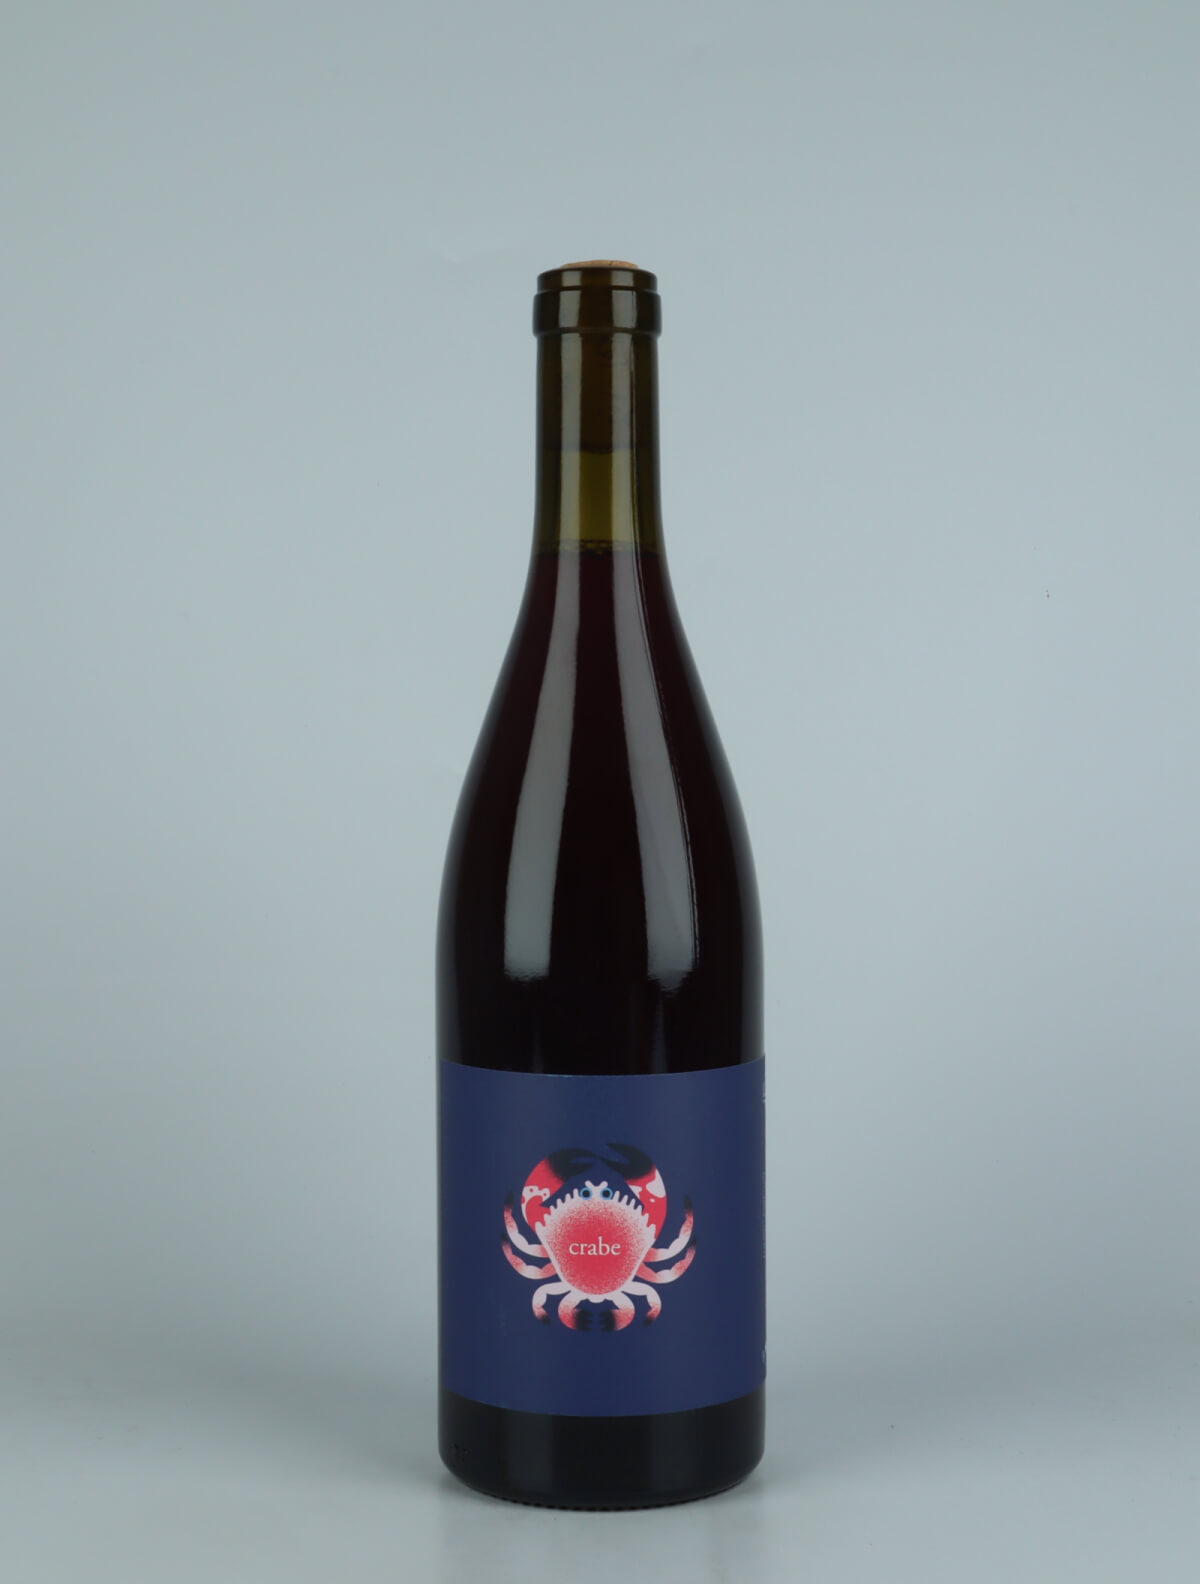 A bottle 2022 Crabe Red wine from Ad Vinum, Gard in France